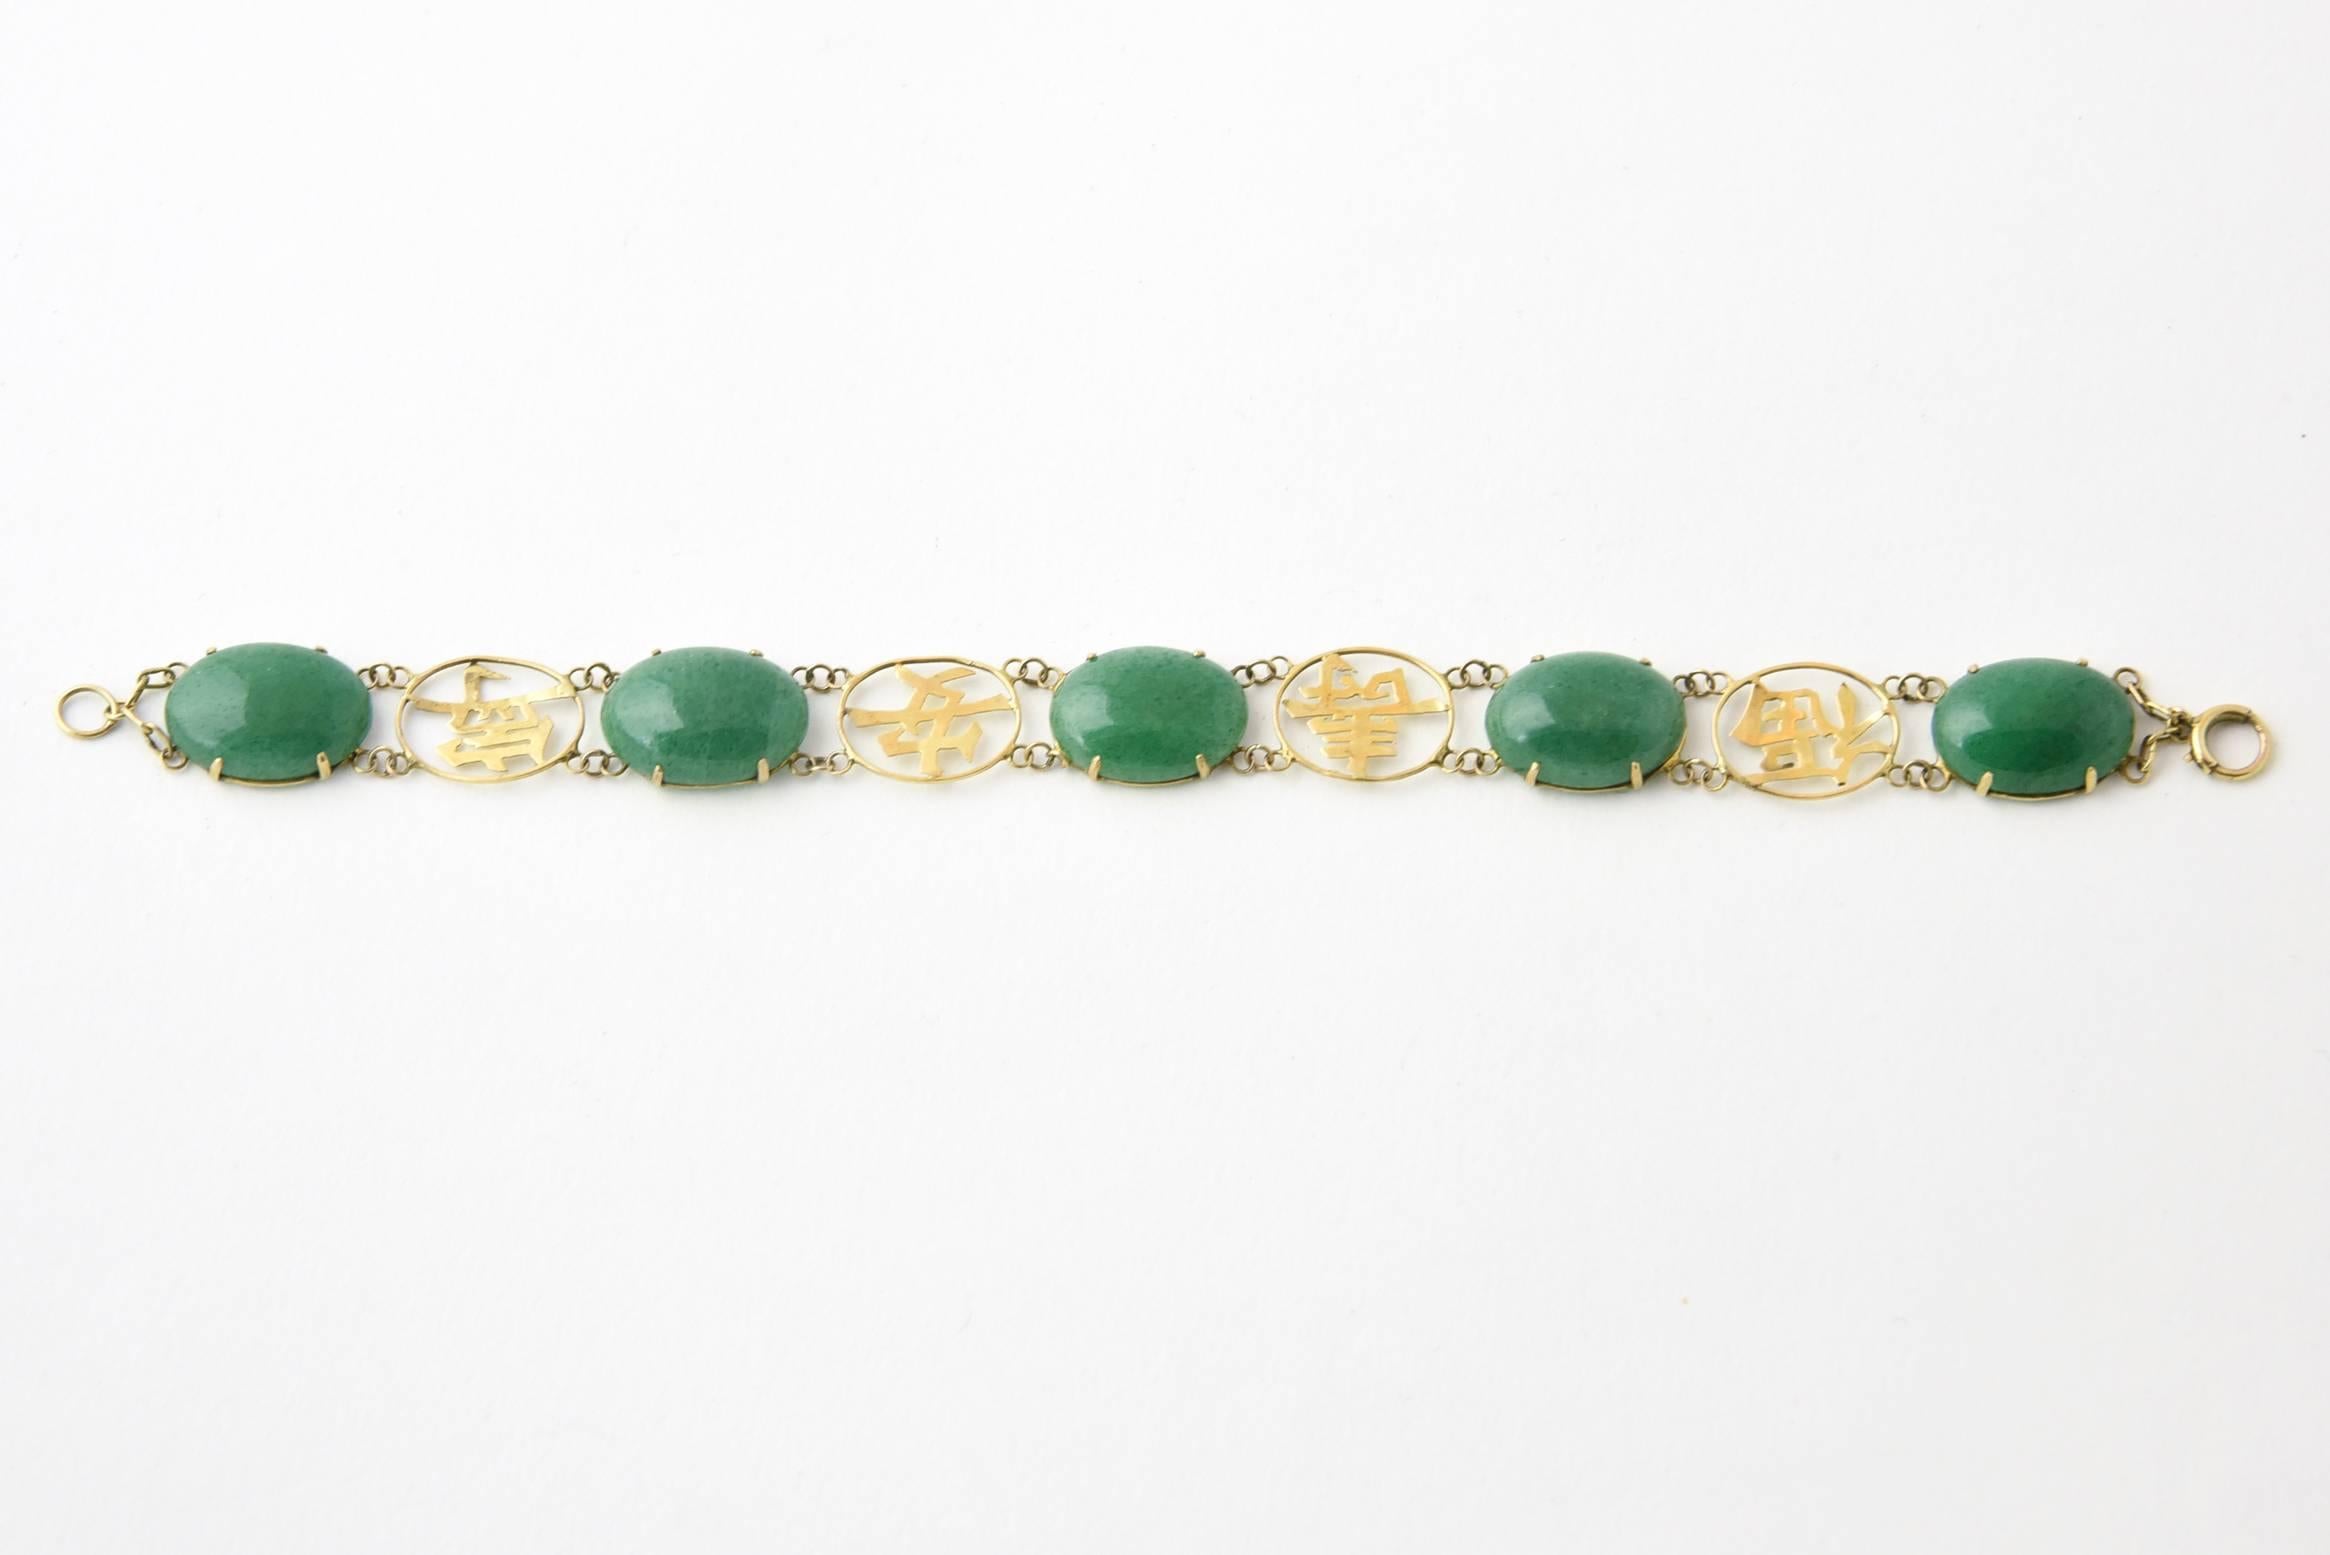 Chinese 14K yellow gold bracelet with characters in oval gold frames alternating with cabochon green aventurine quartz pieces mounted in gold frames. Some gold letters are a little bent.